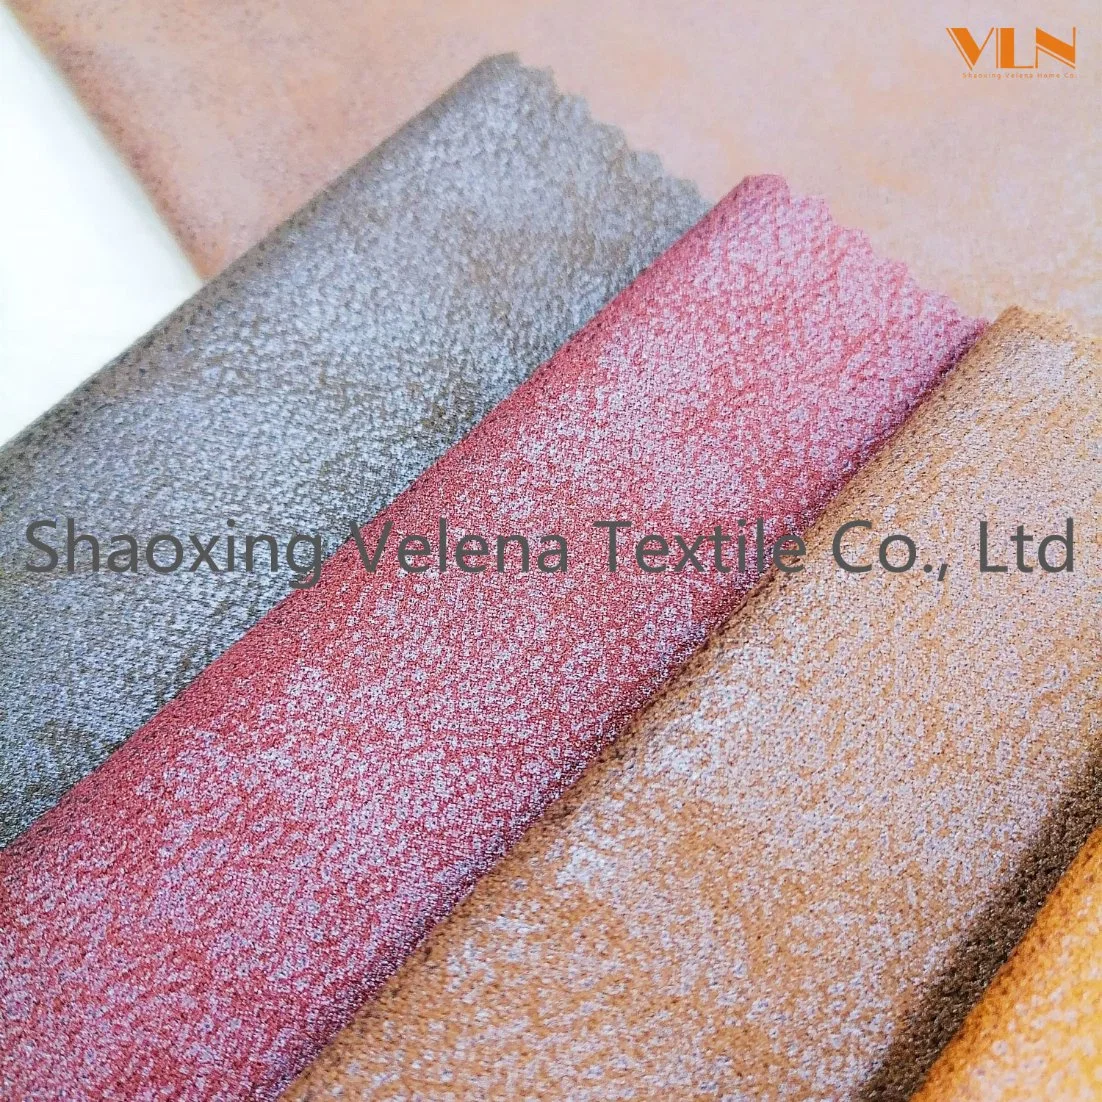 Original Factory Technology Leather Suede Fabric Dyeing with Bronzing Upholstery Furniture Sofa Textile Fabric